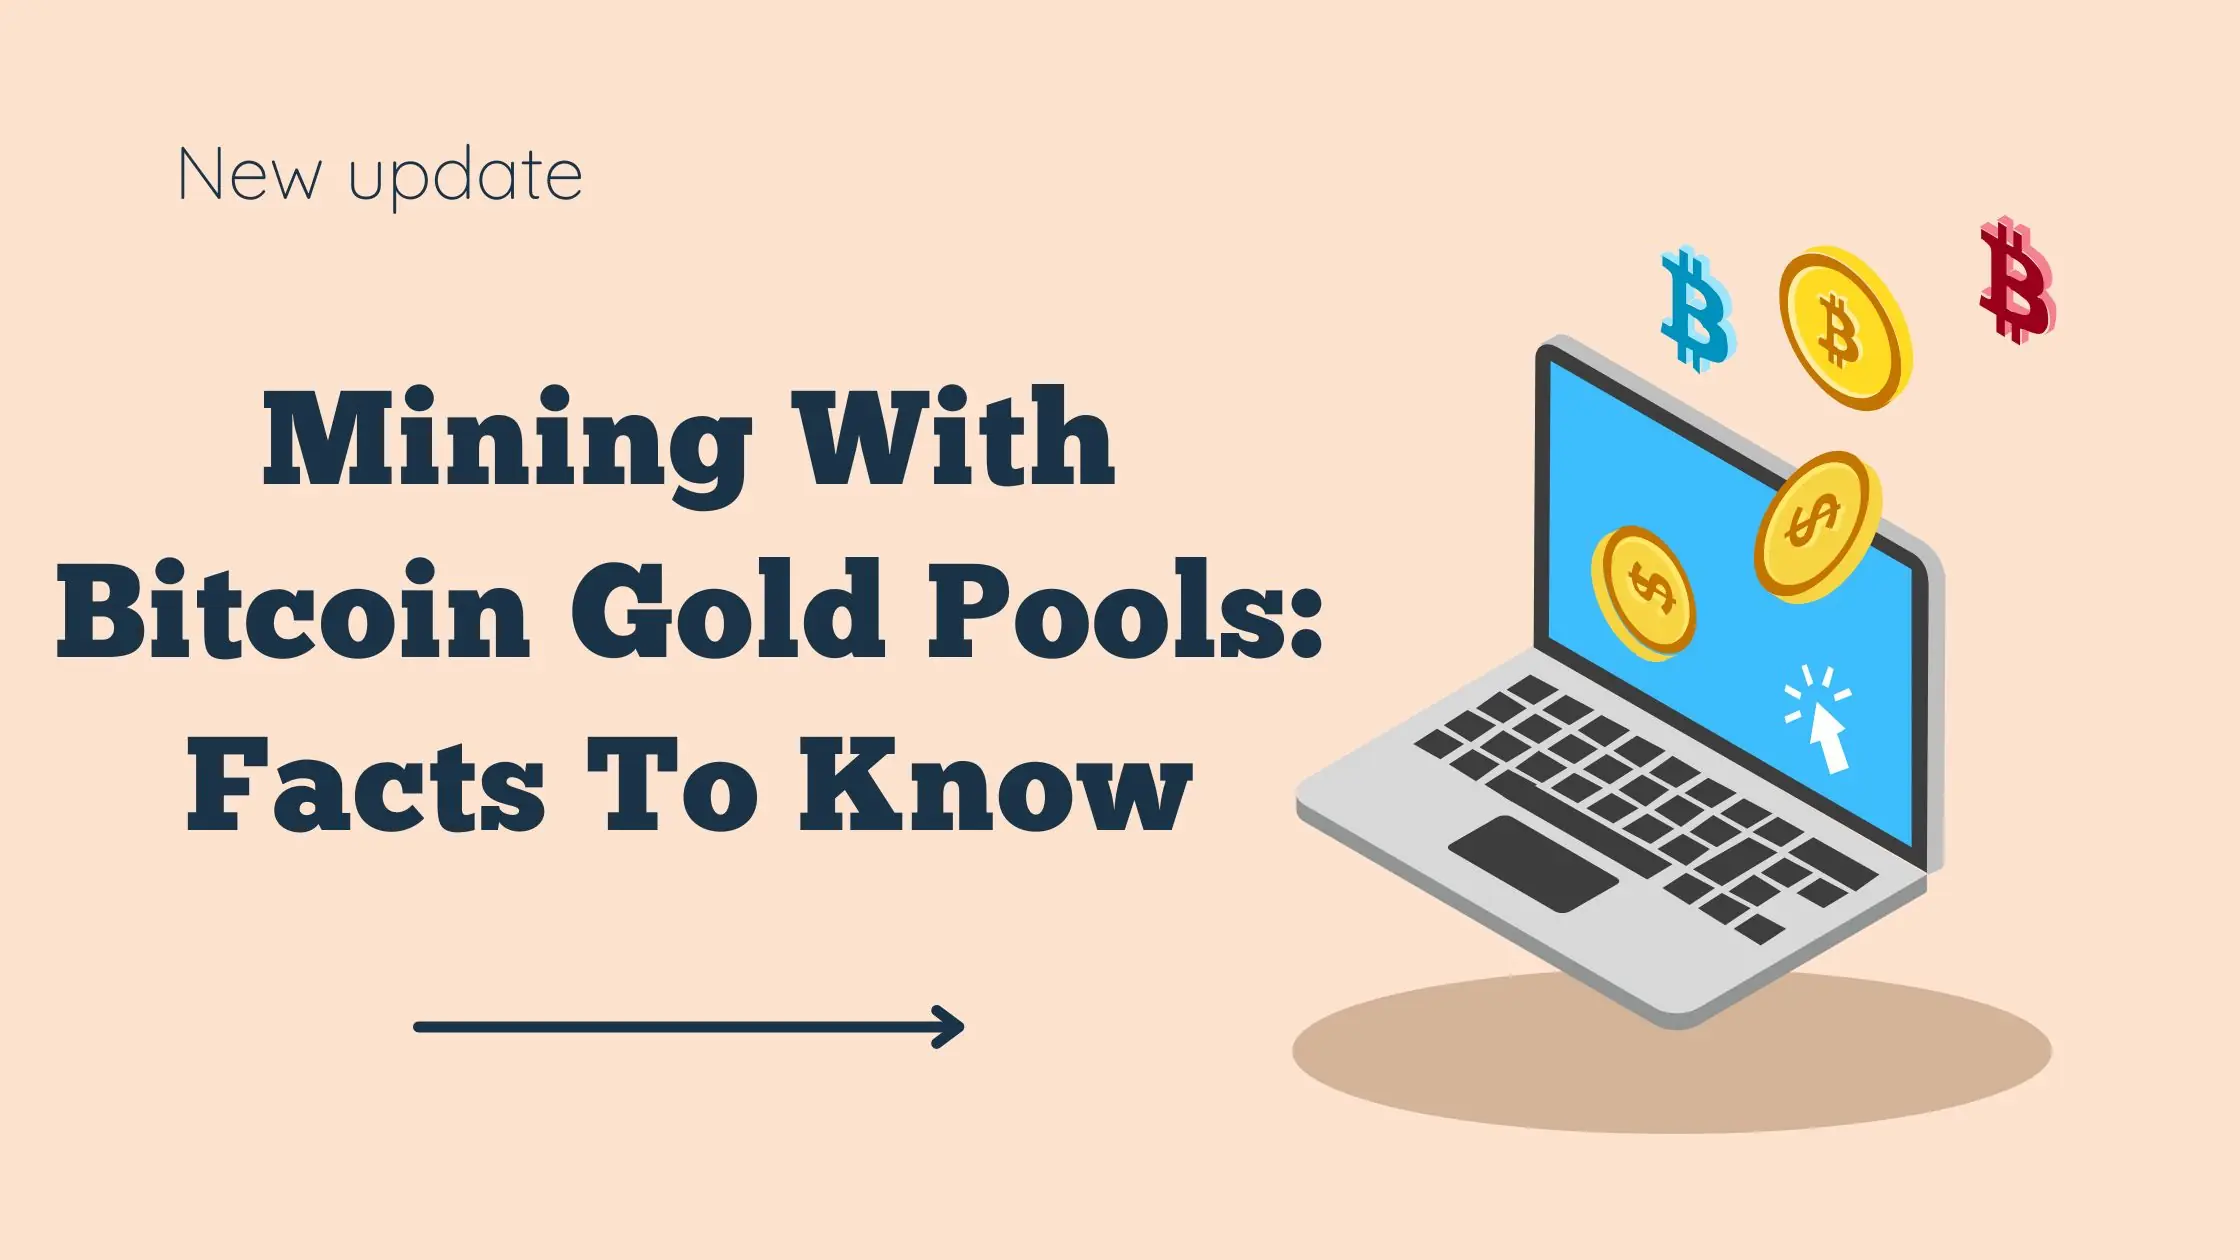 Mining With Bitcoin Gold Pools Facts To Know